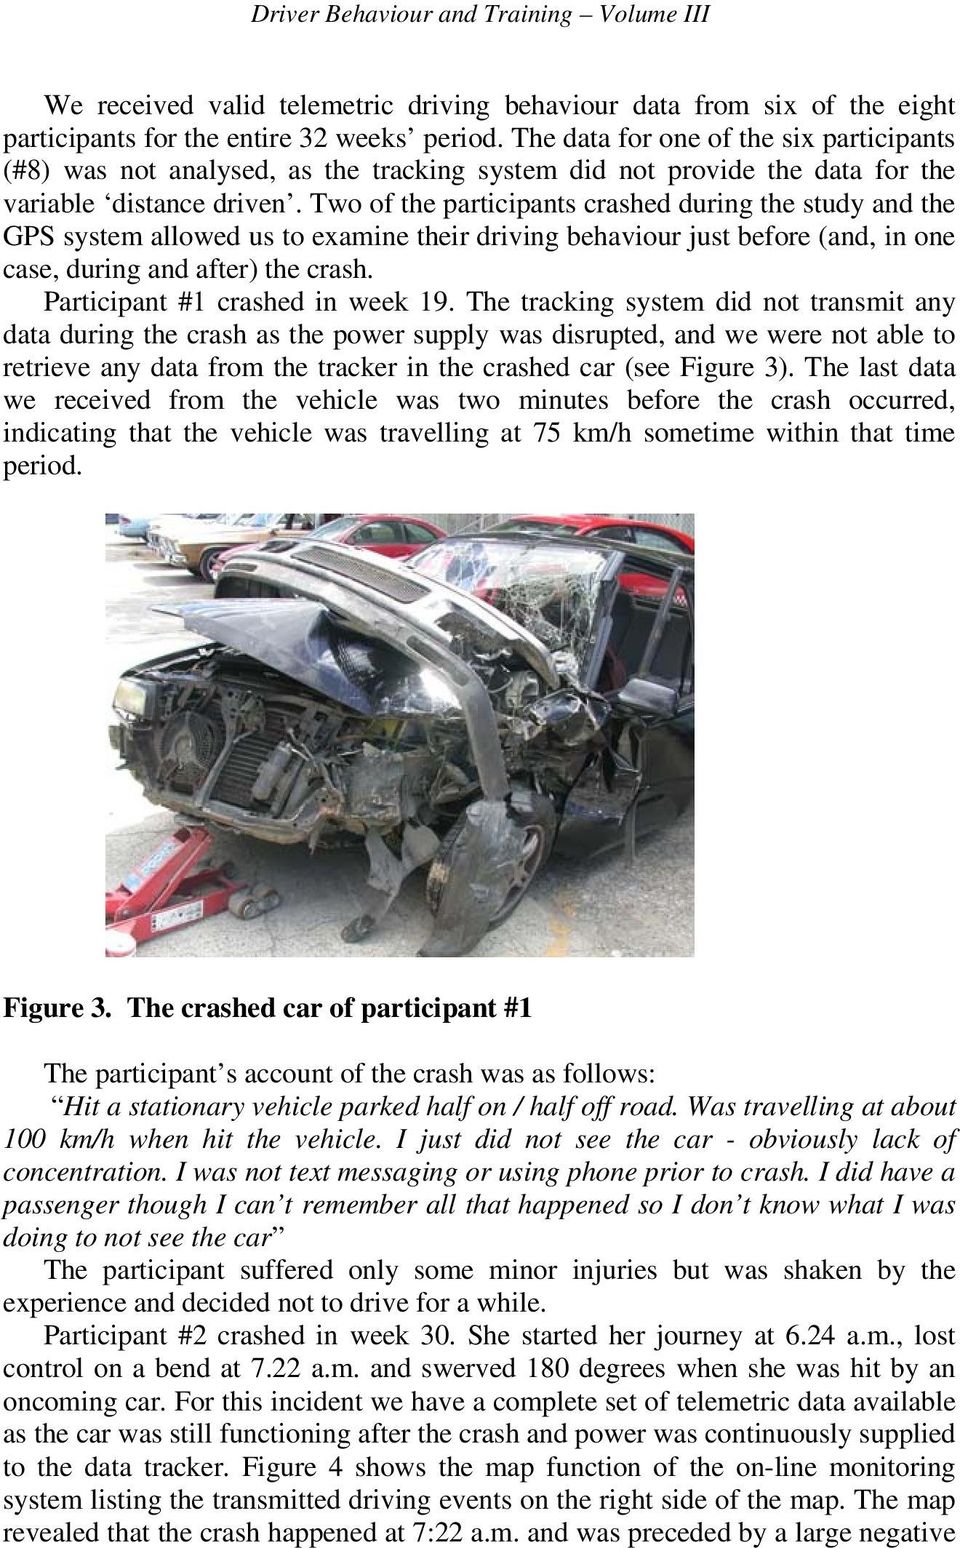 Two of the participants crashed during the study and the GPS system allowed us to examine their driving behaviour just before (and, in one case, during and after) the crash.